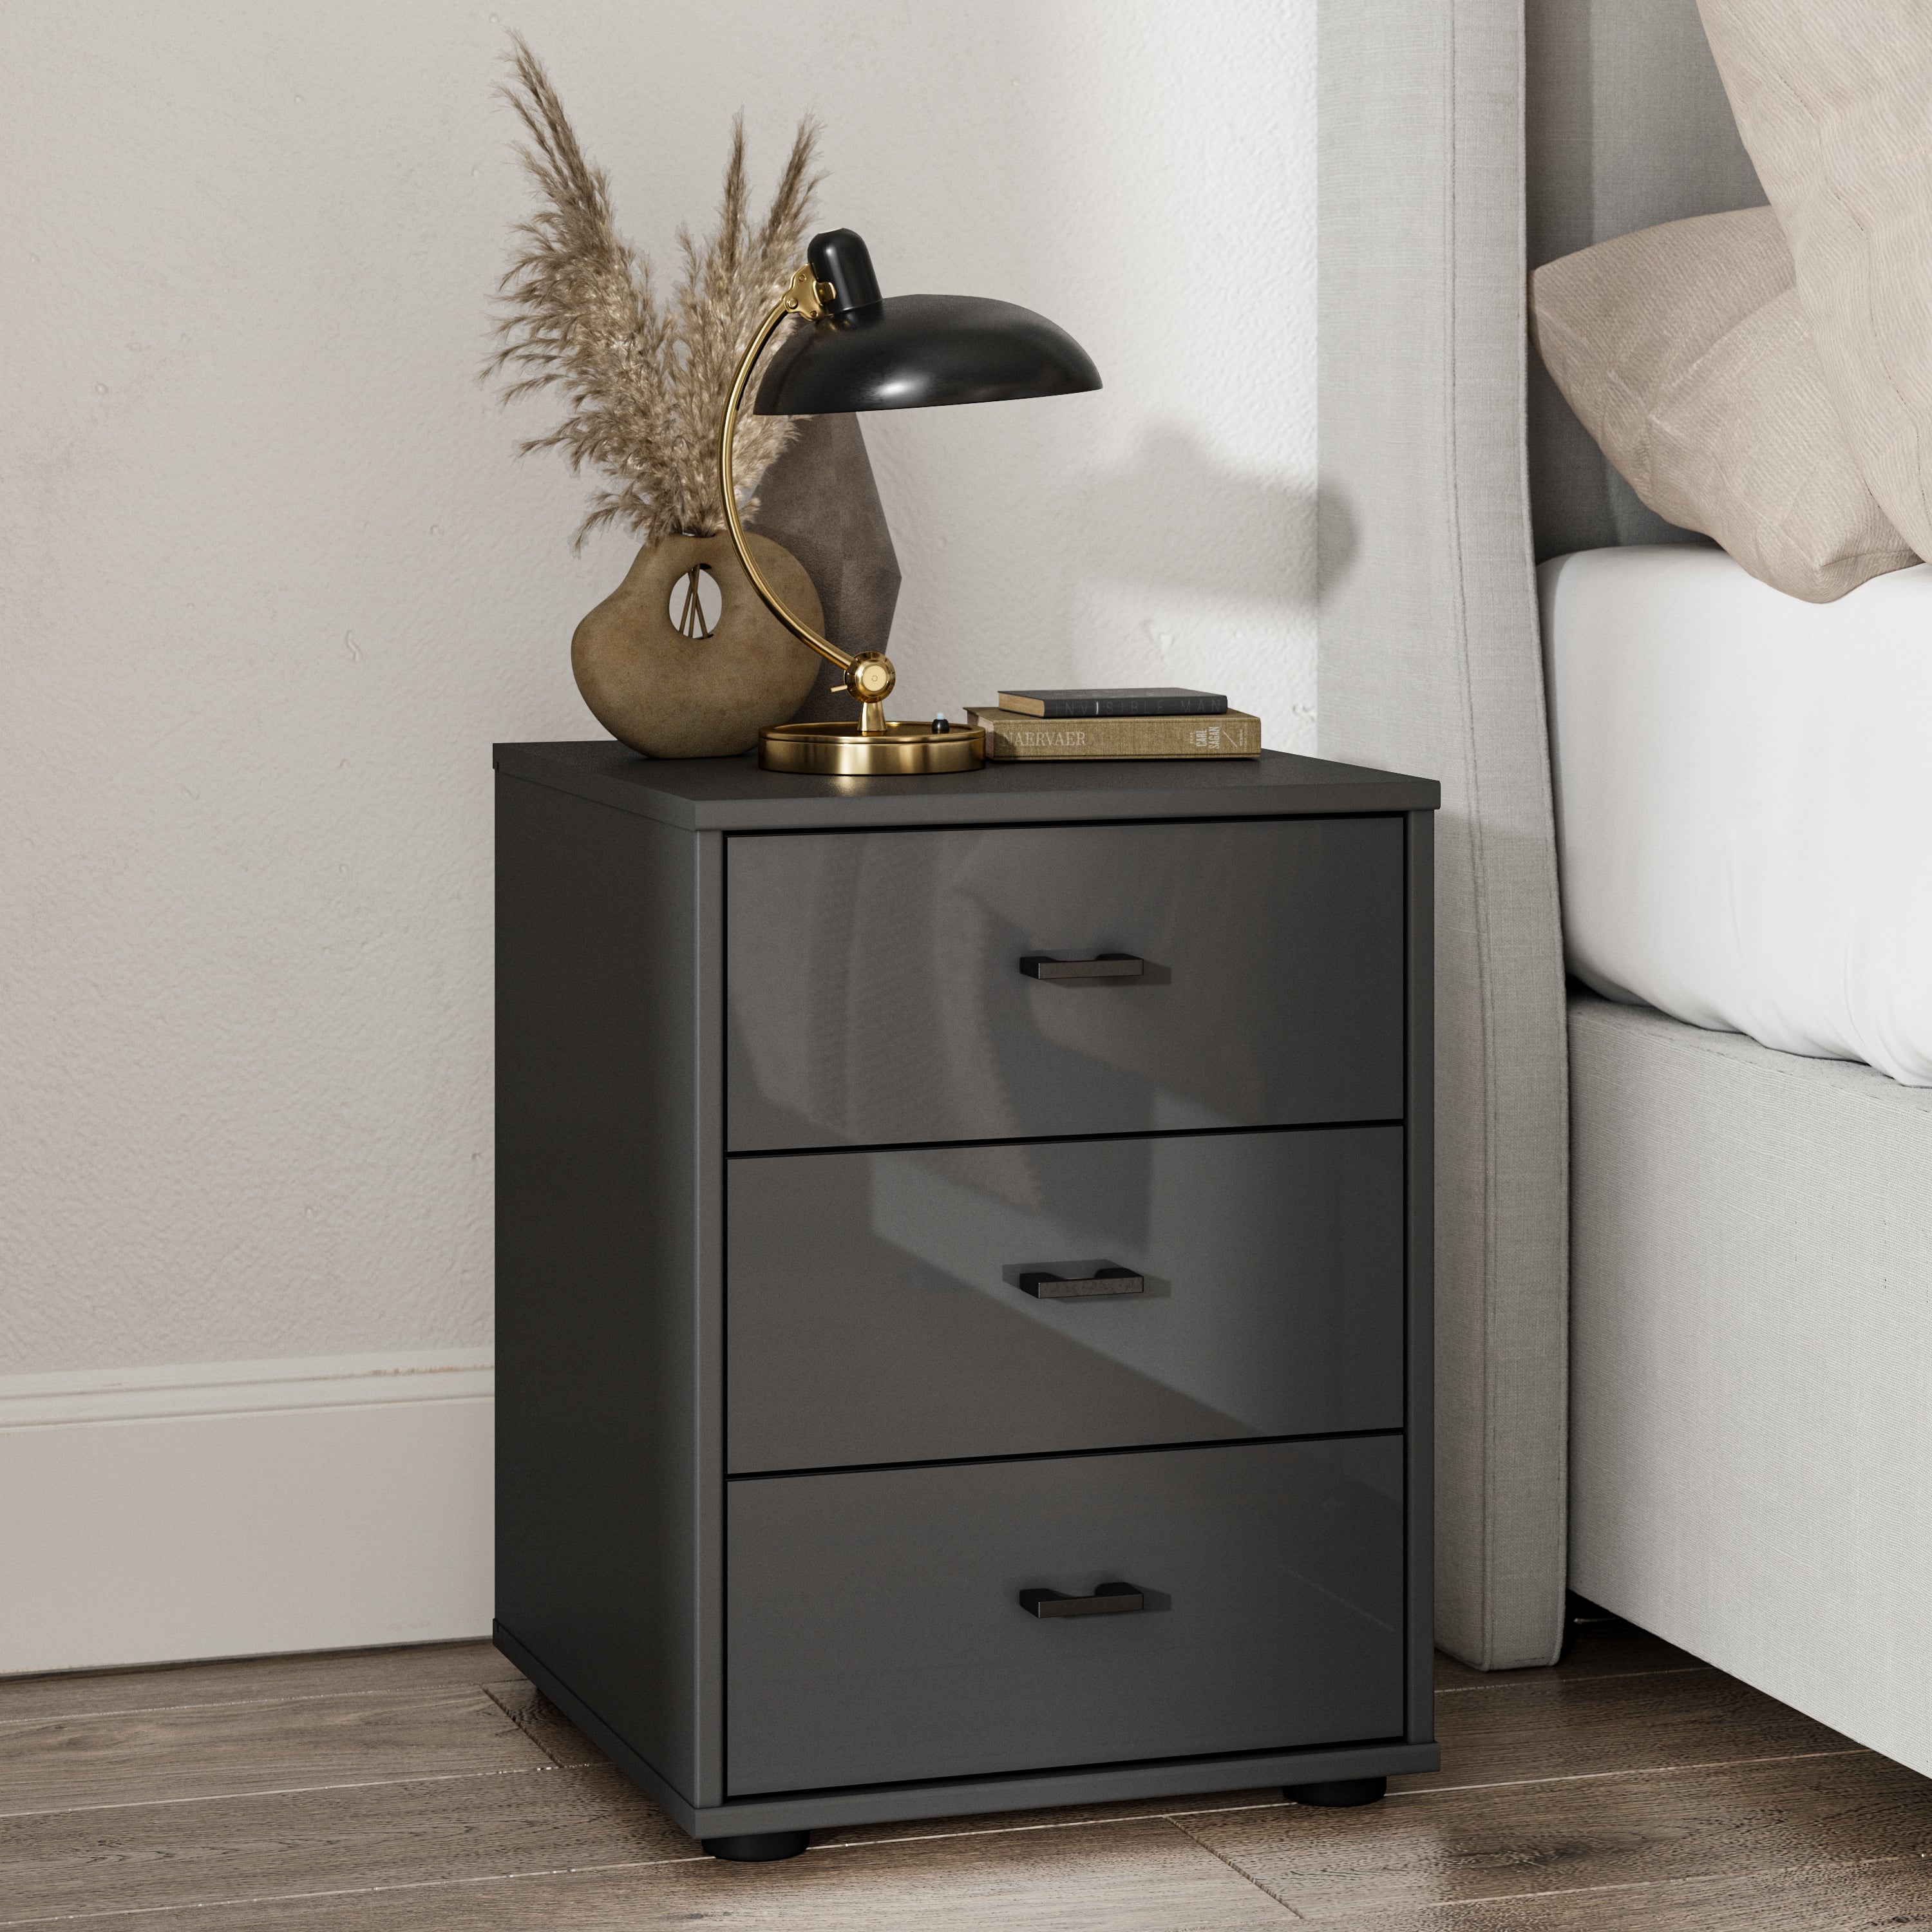 Wiemann Kahla Glass Fronted 3 Drawer Bedside Table Graphite (Grey)